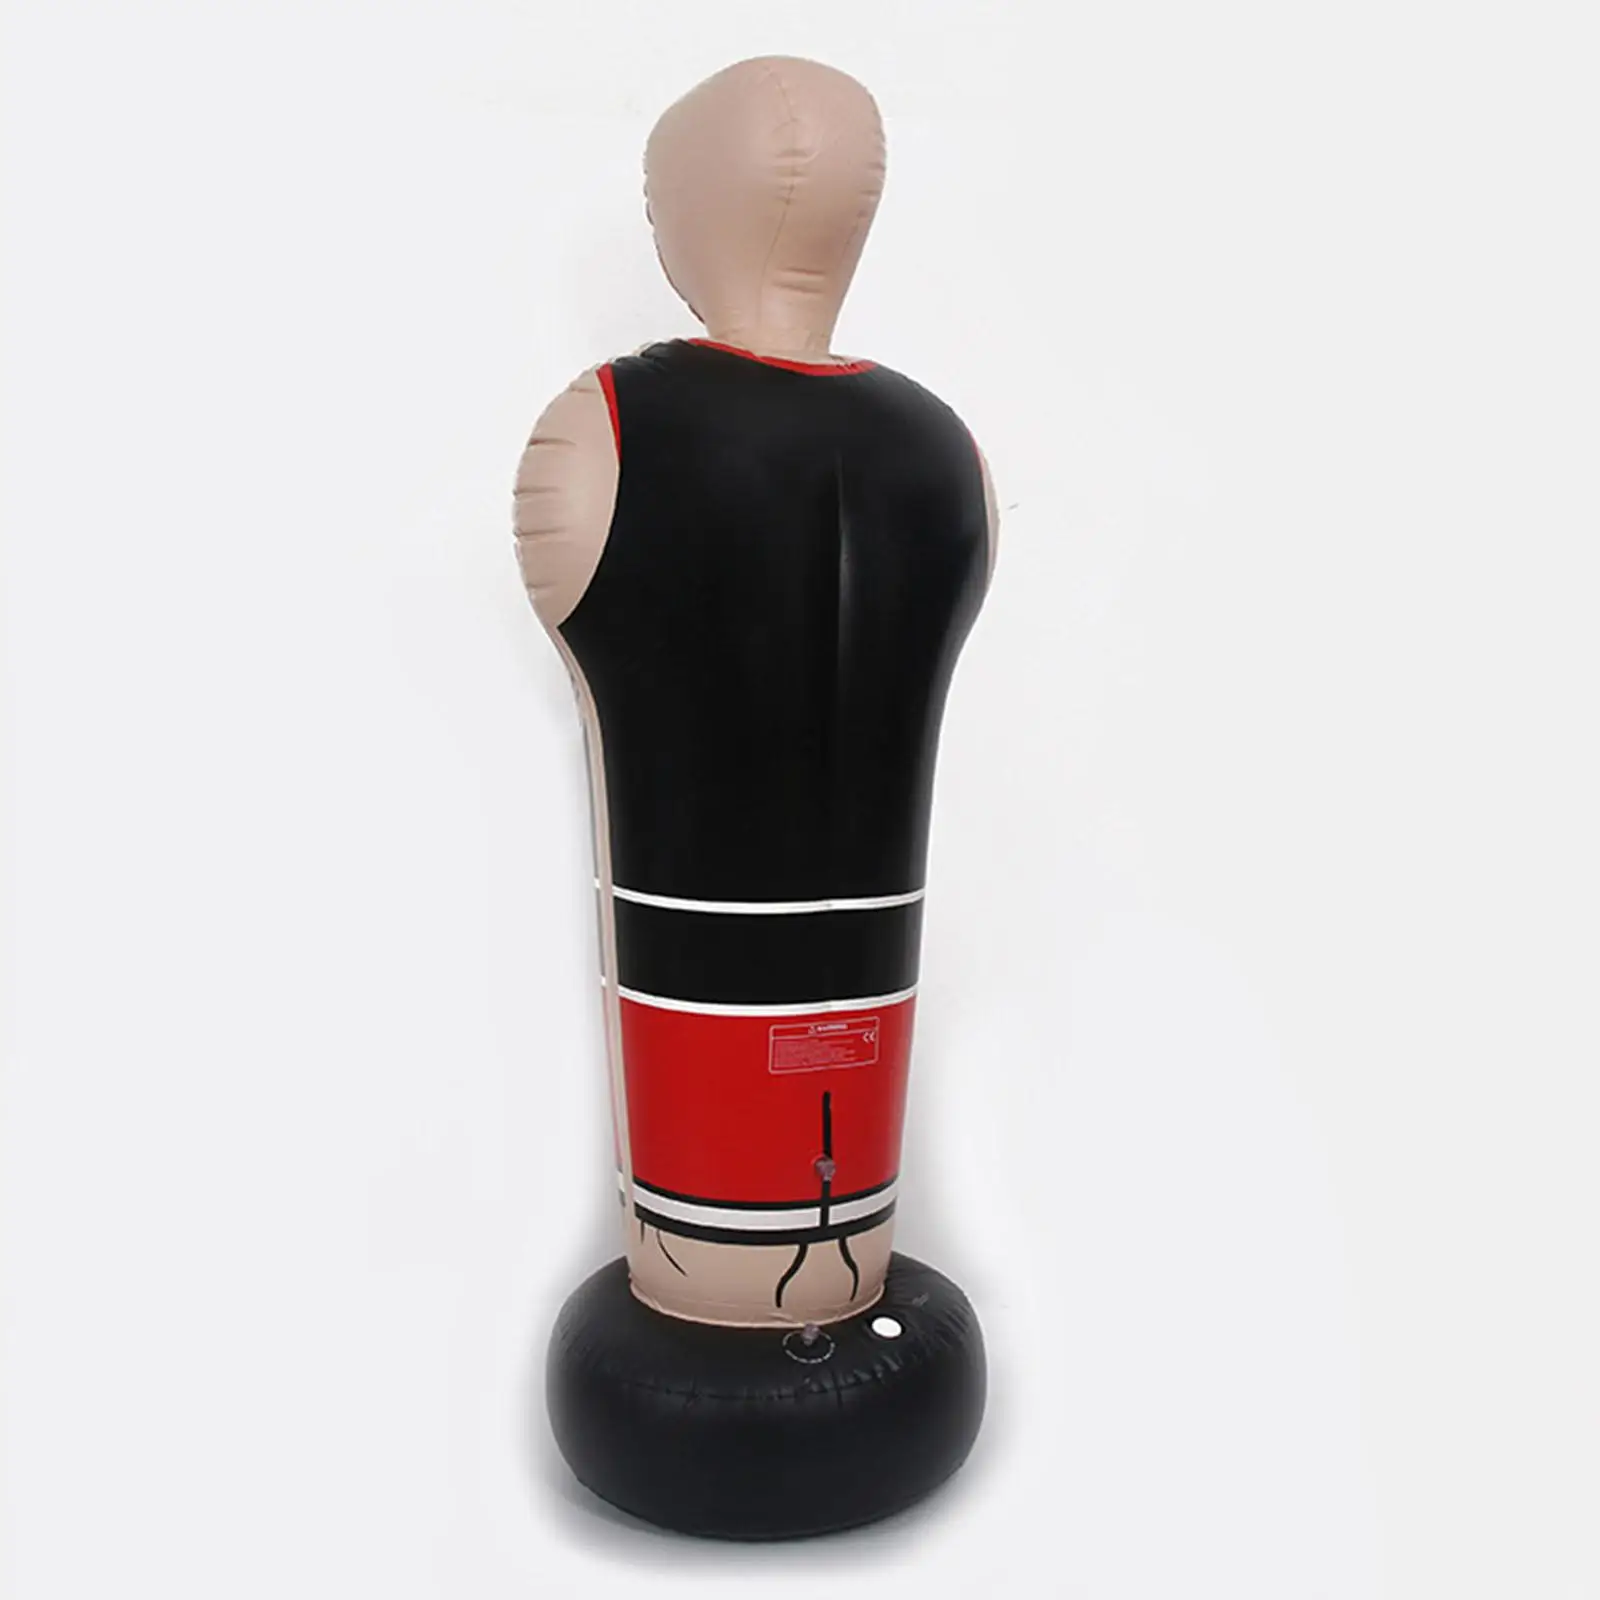 Inflatable Punching Bag Free Standing Boxing Dummy Sandbag for Kids Teens for Exercise Practicing Fitness Tool Workout Muay Thai